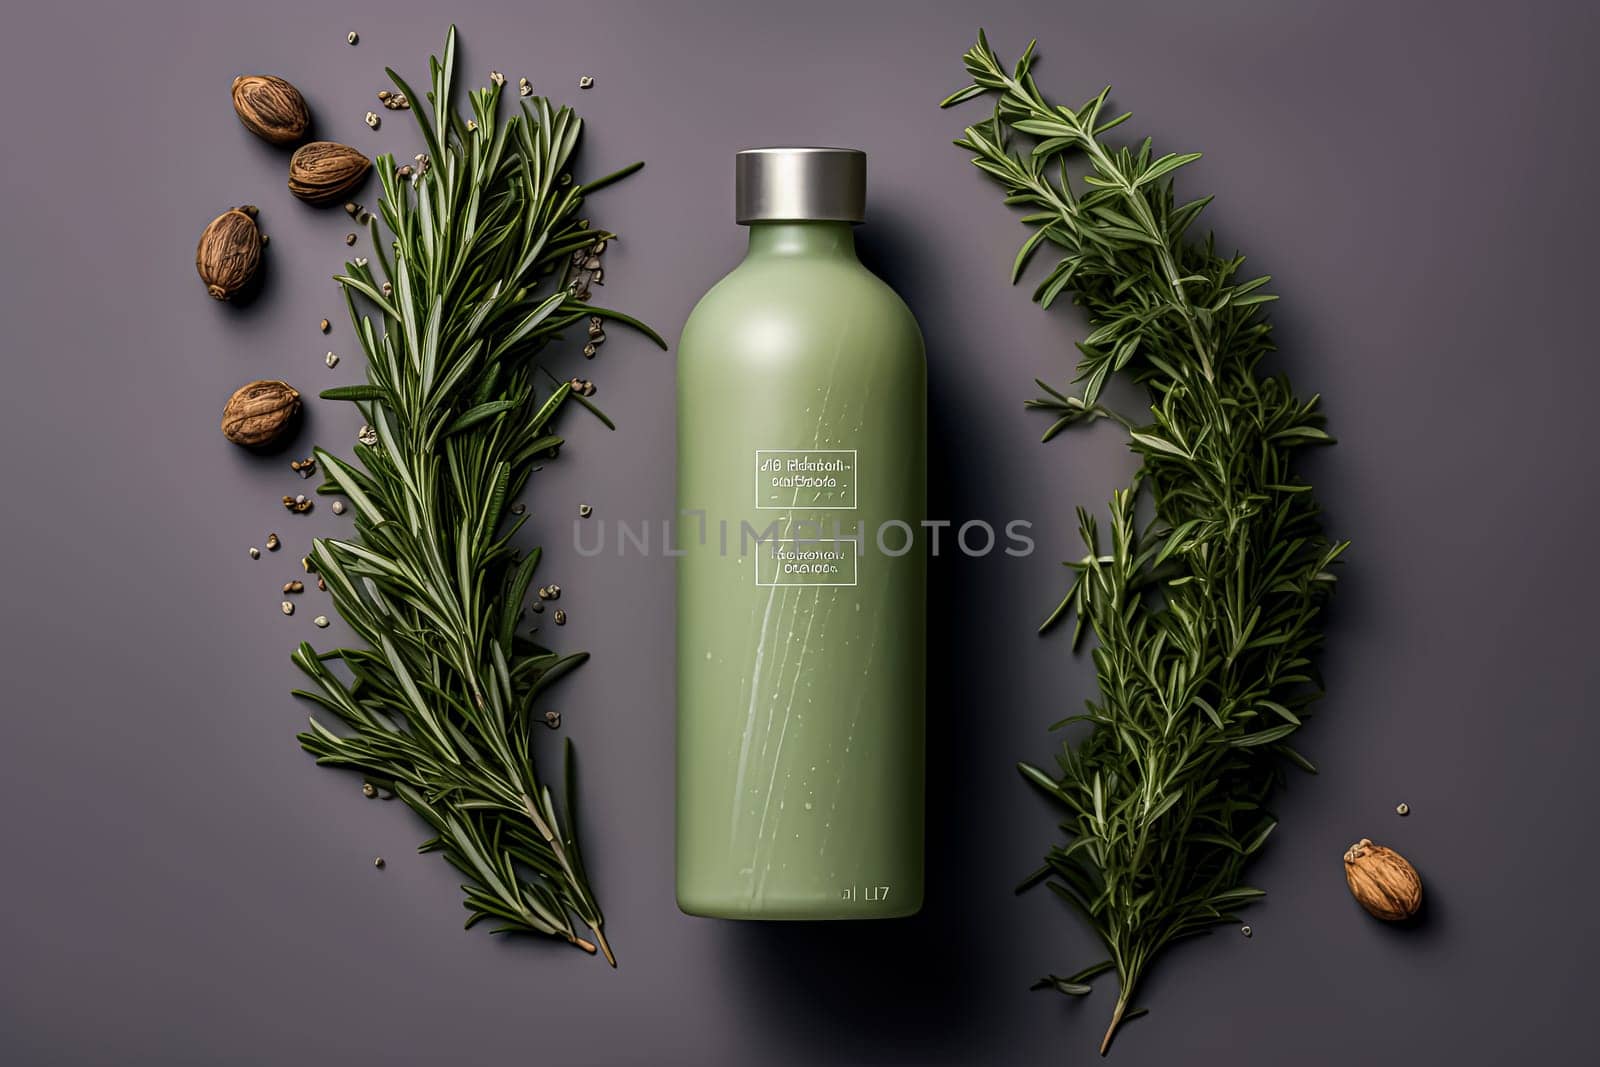 A bottle of water is surrounded by herbs and spices. The bottle is green and has a silver cap. The herbs and spices include parsley, rosemary, and thyme. Concept of freshness and health